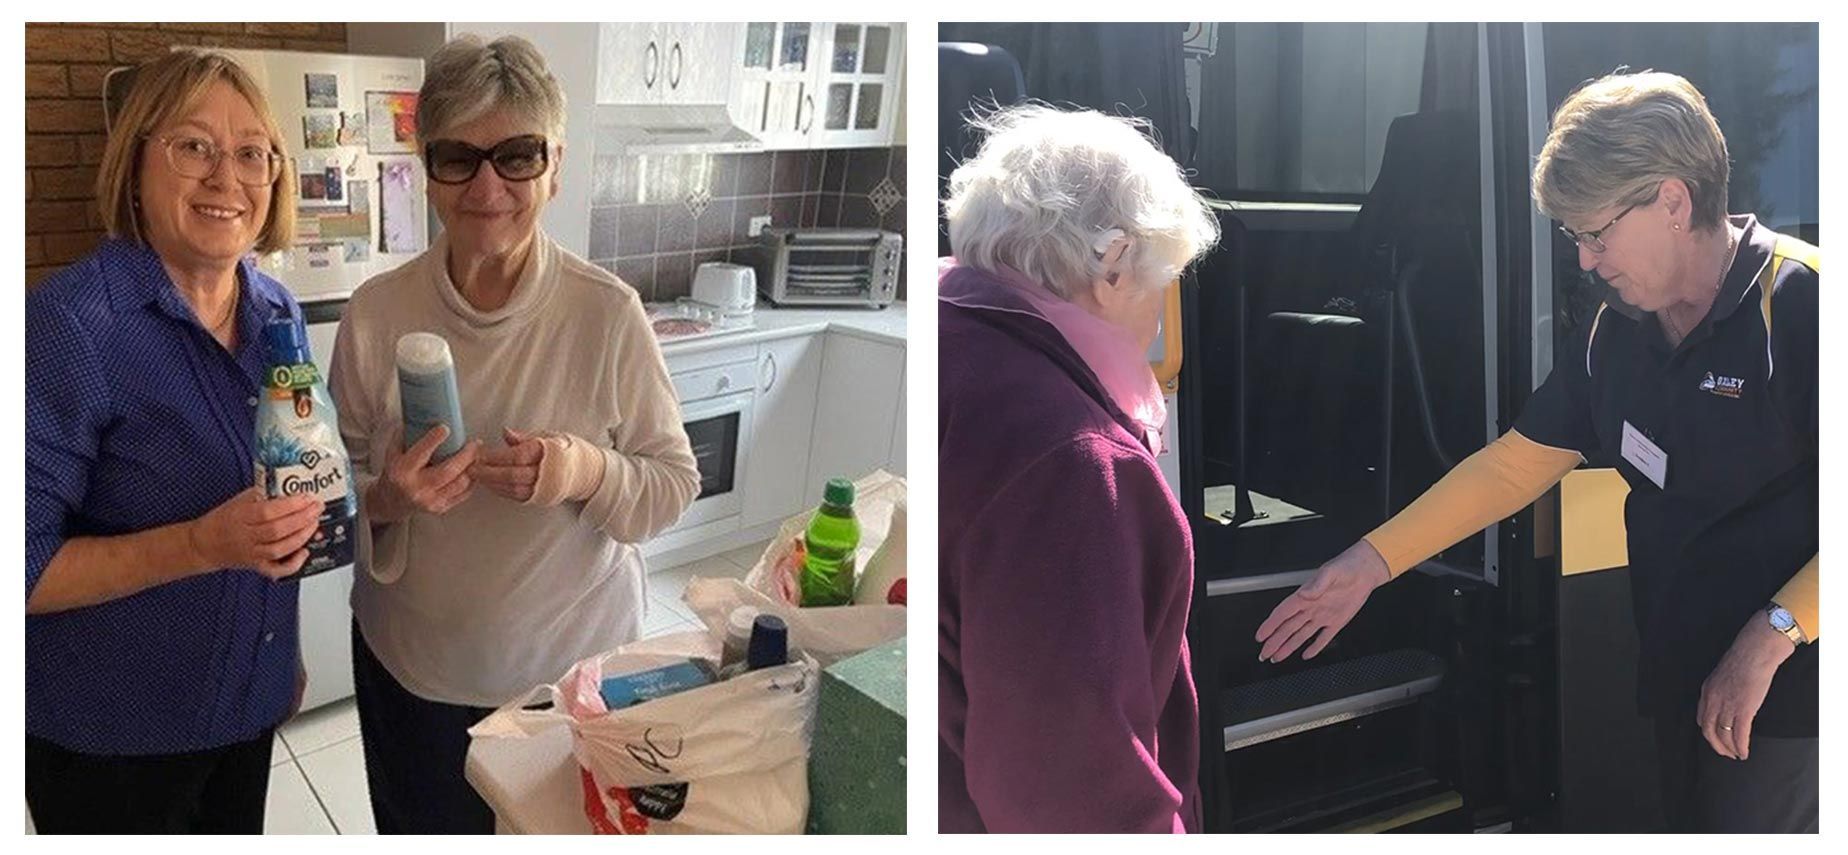 Two Old Women In The Kitchen And One Old Women Riding A Bus — Social Outings for Seniors in Tamworth, NSW